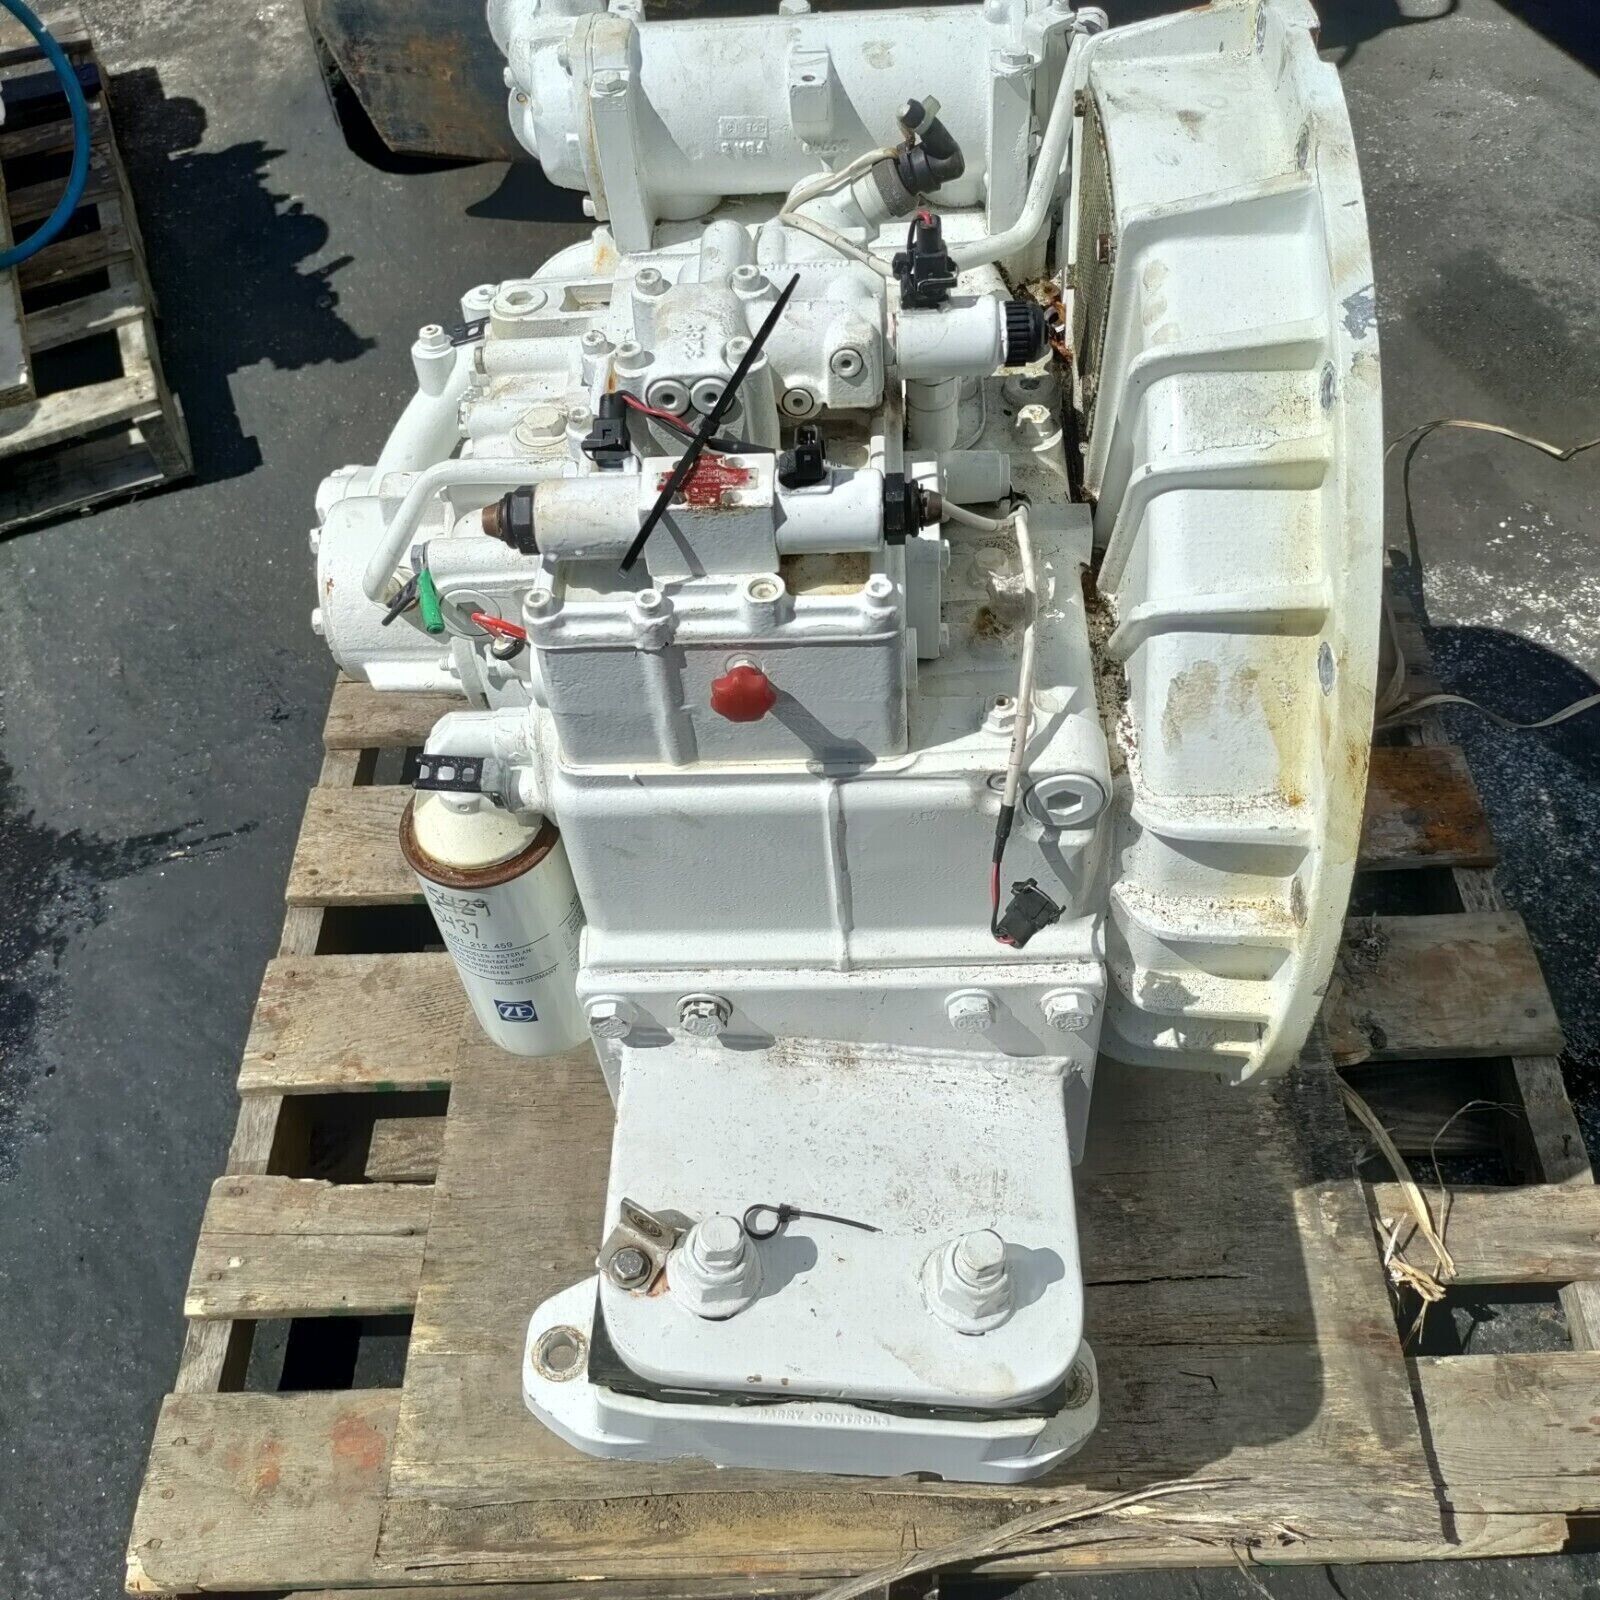 ZF MARINE ZF 2070, 1.765 to 1 RATIO TRANSMISSION  / GEAR BOX  / RECENT TAKE OUTS